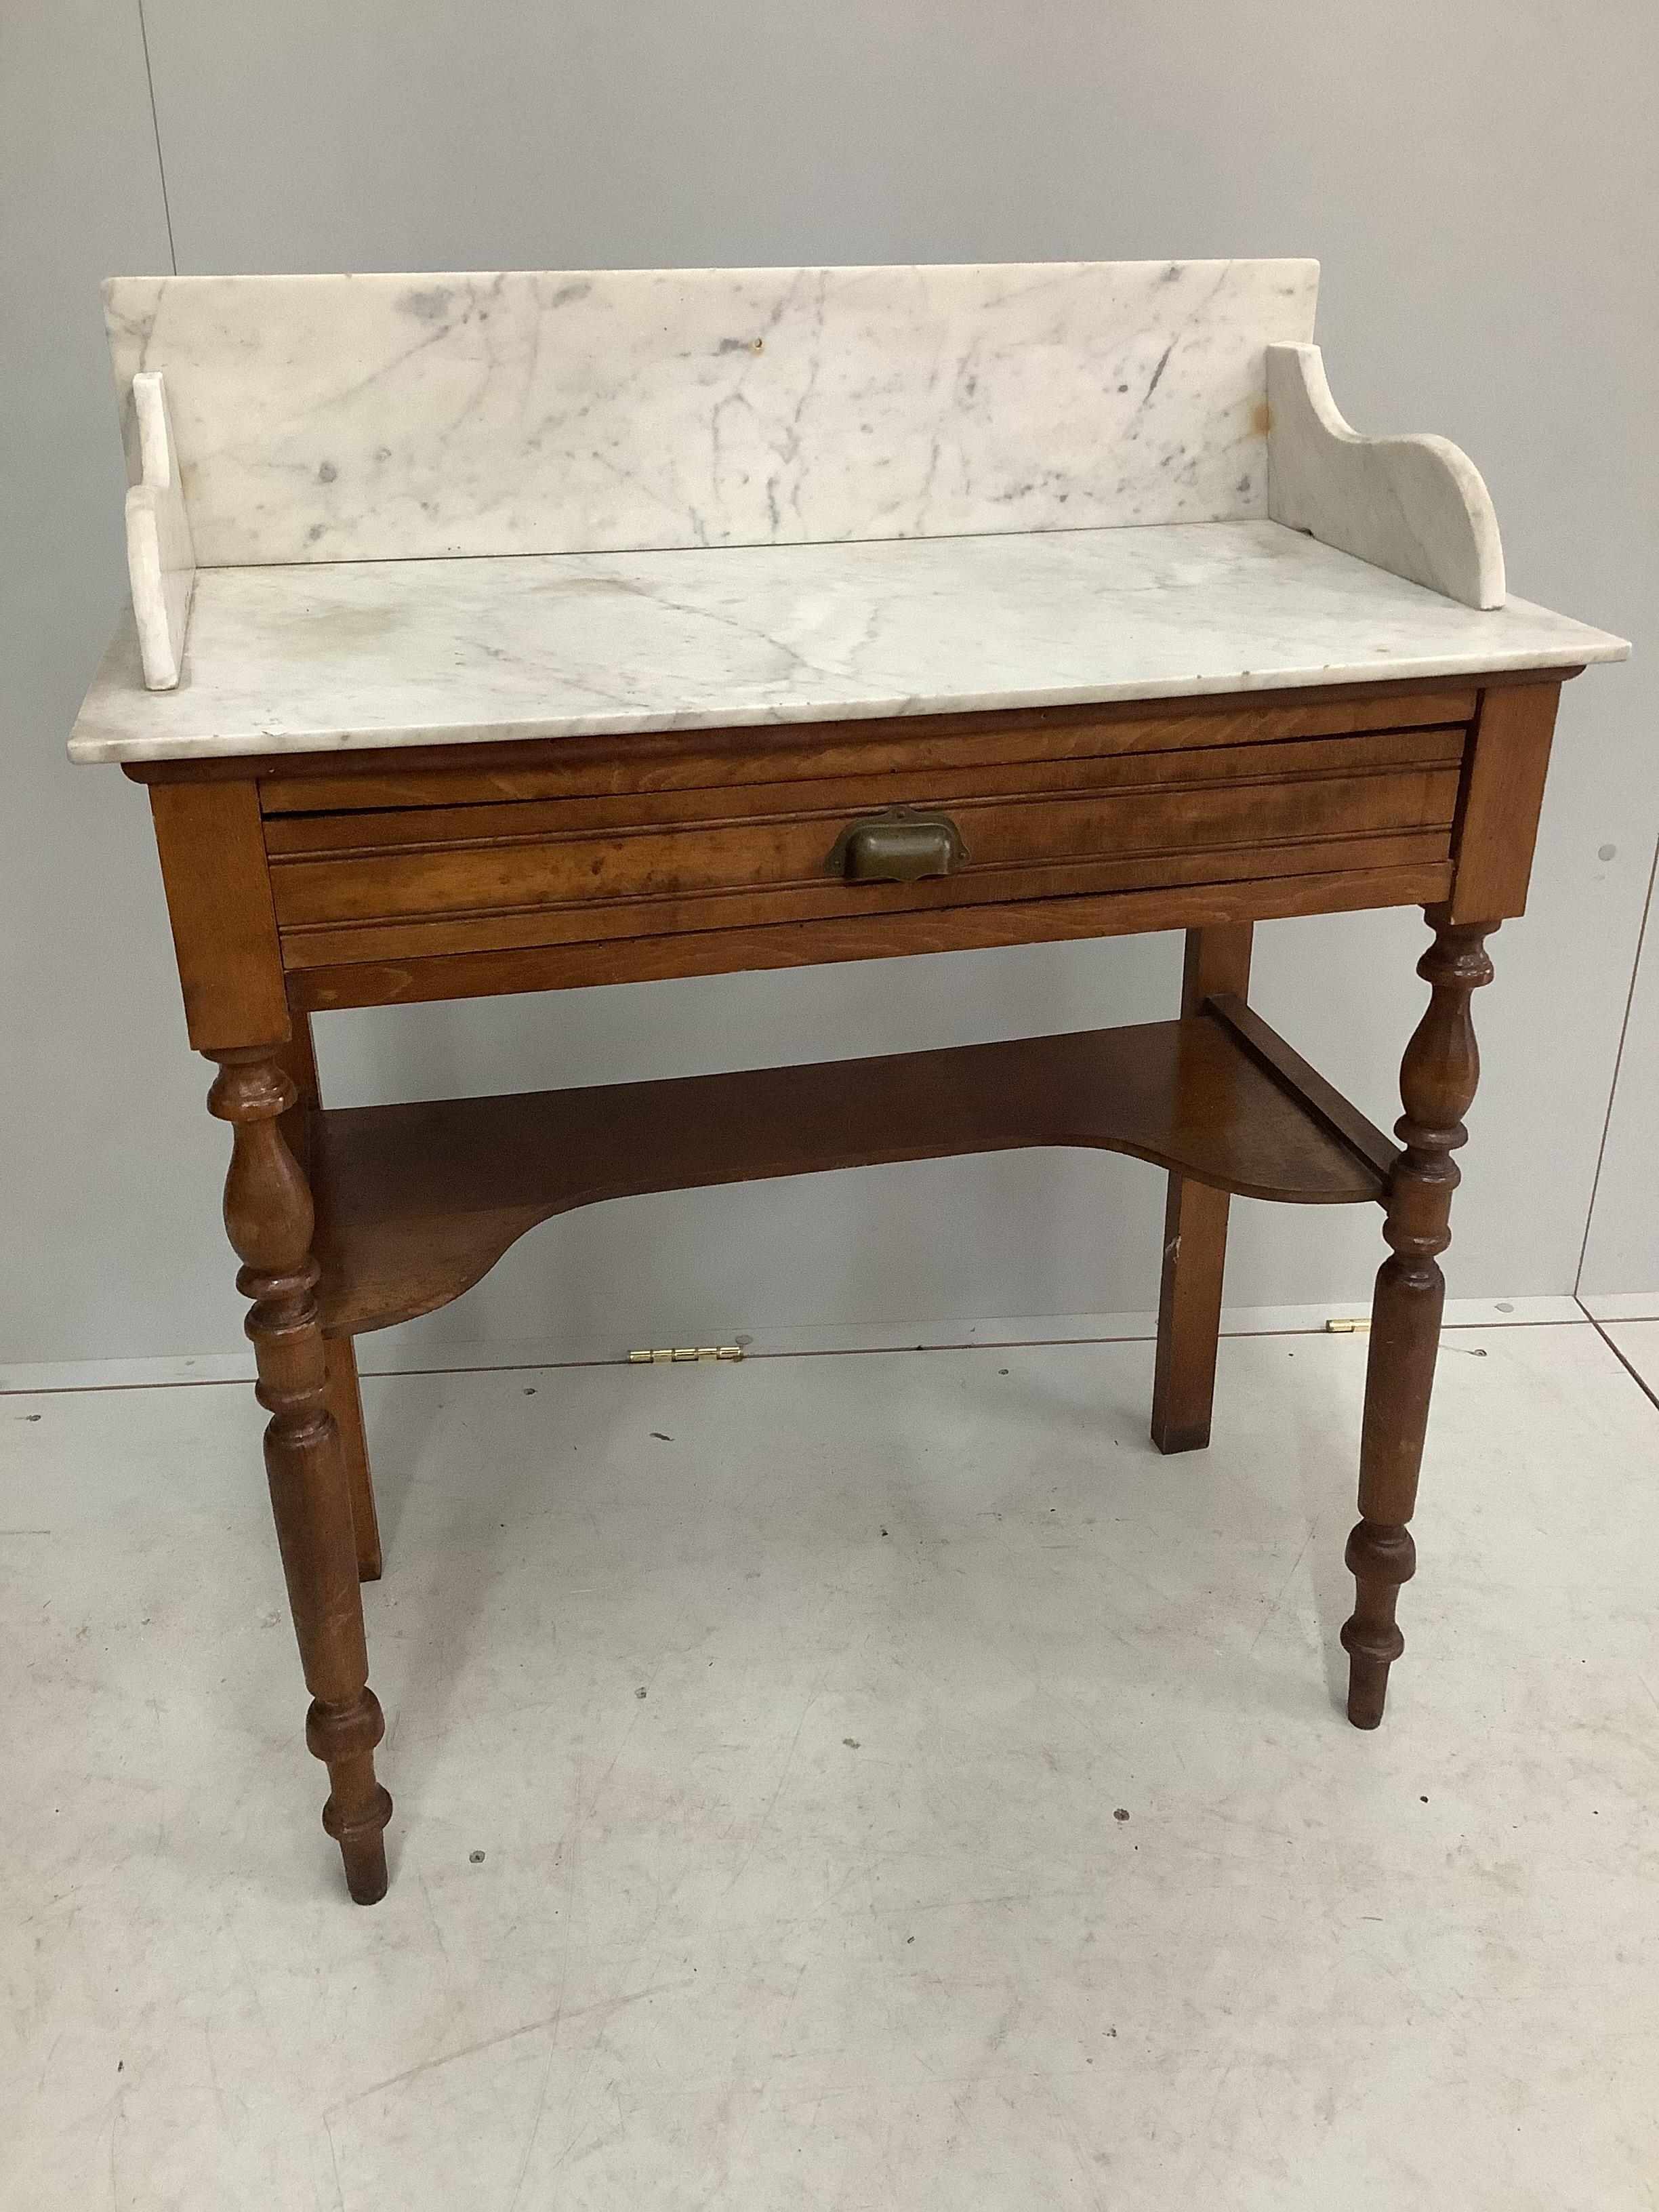 An early 20th century French marble top washstand, width 80cm, depth 40cm, height 95cm